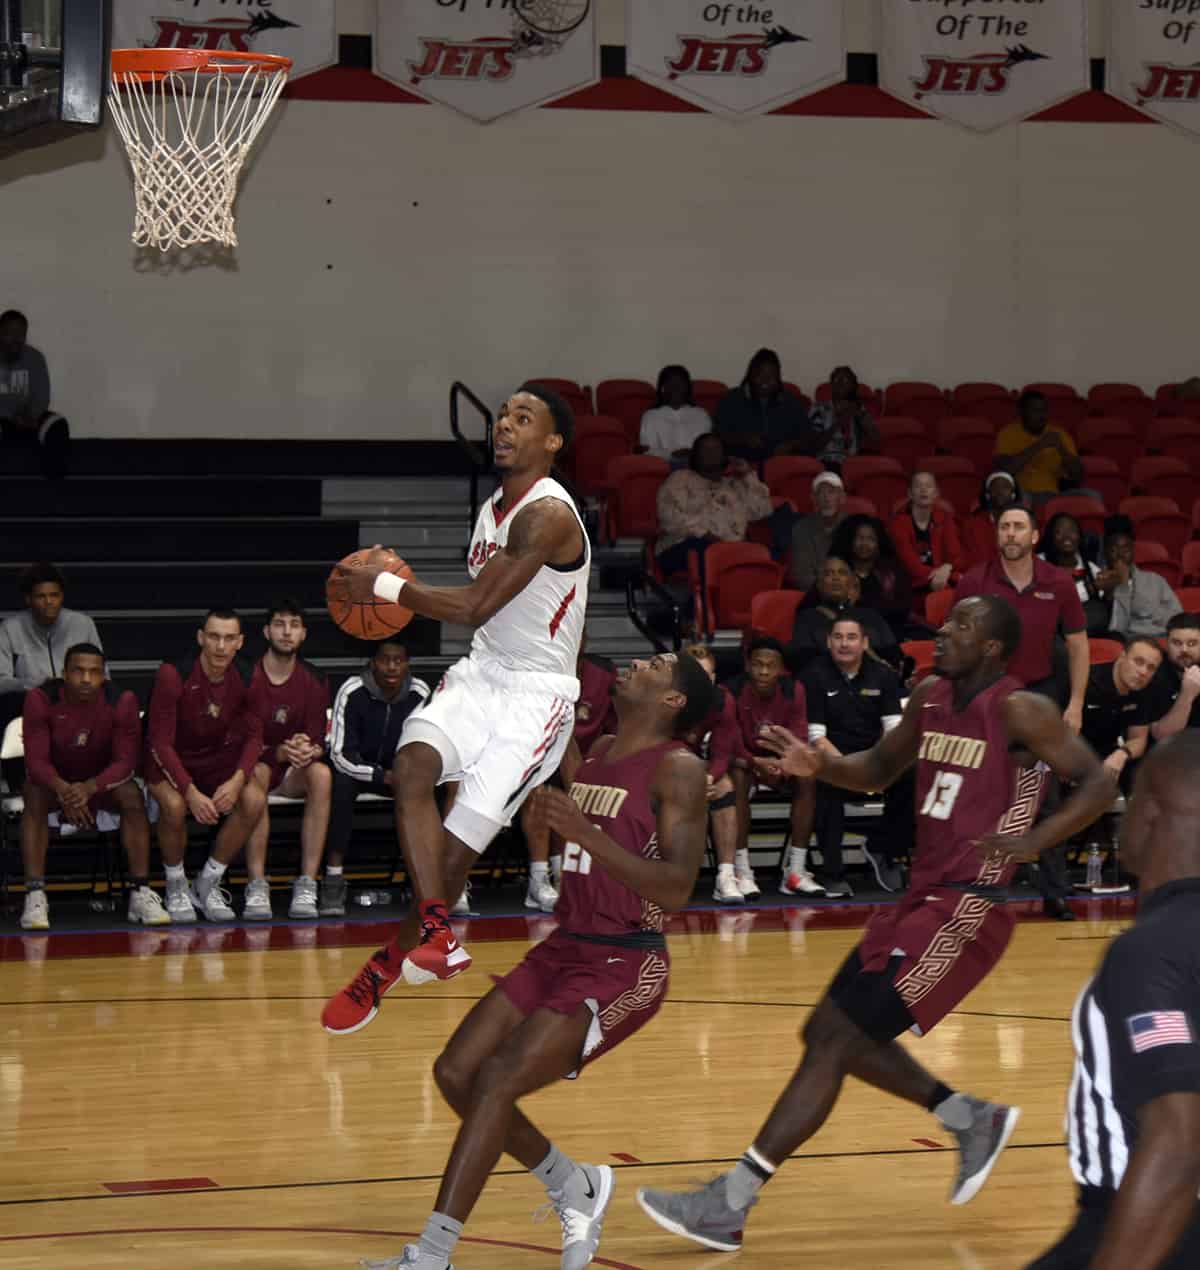 Lamont Sanders drives for a score against Triton College. Sanders led the Jets in scoring for both games in the Pete Arrington Classic.